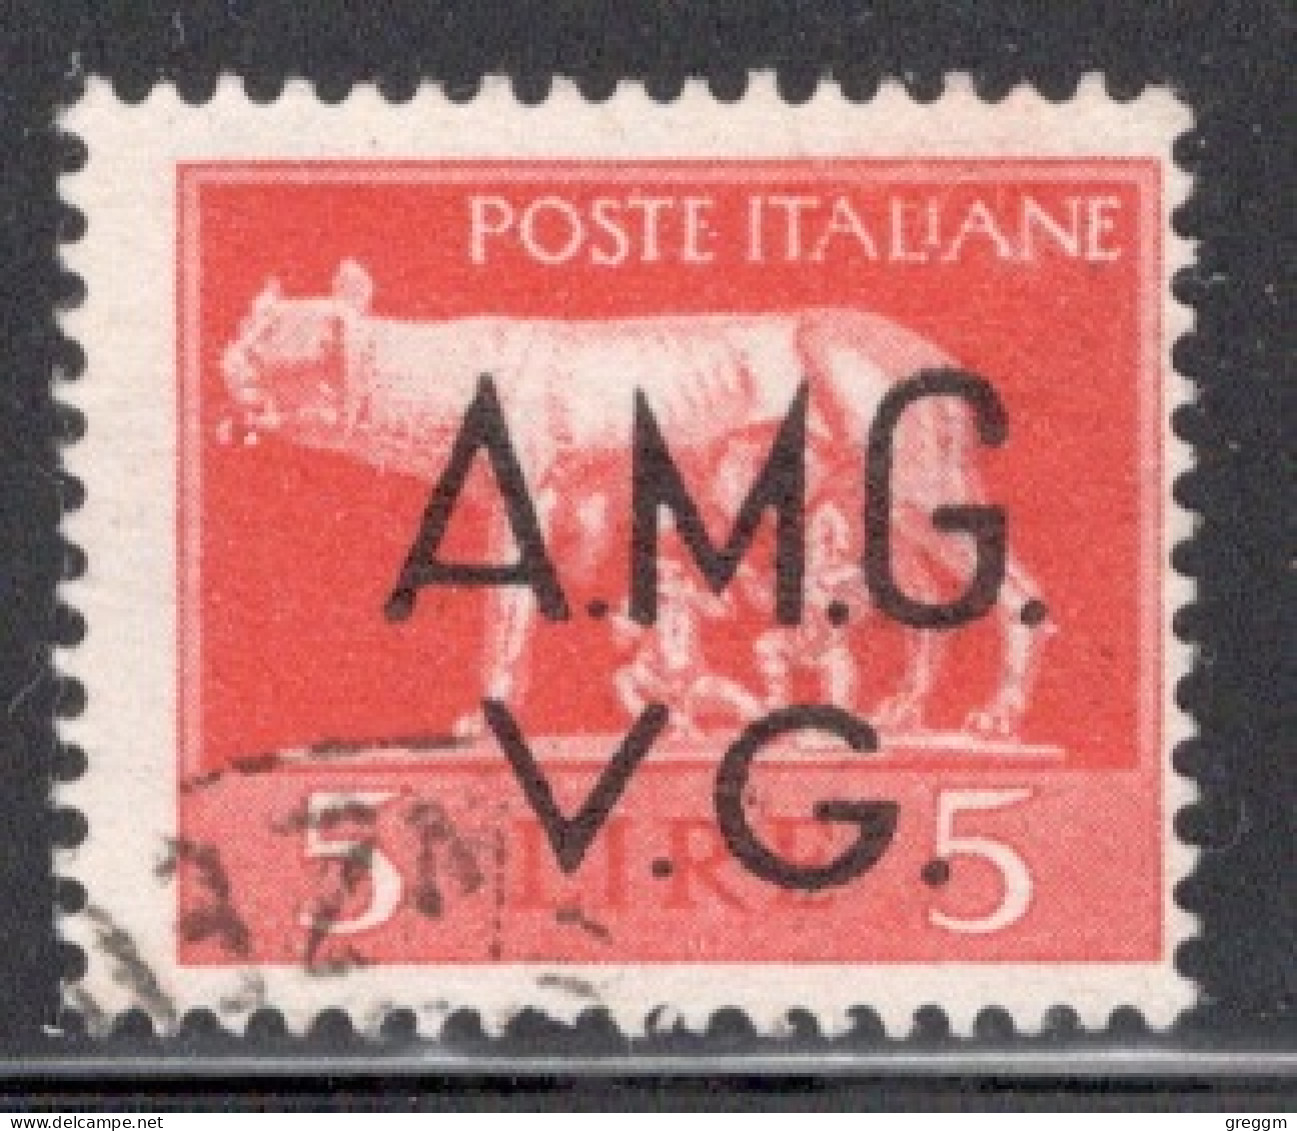 Italy 1945 Postage Stamp Overprinted "A.M.G.V.G." - Watermarked In Fine Used - Afgestempeld